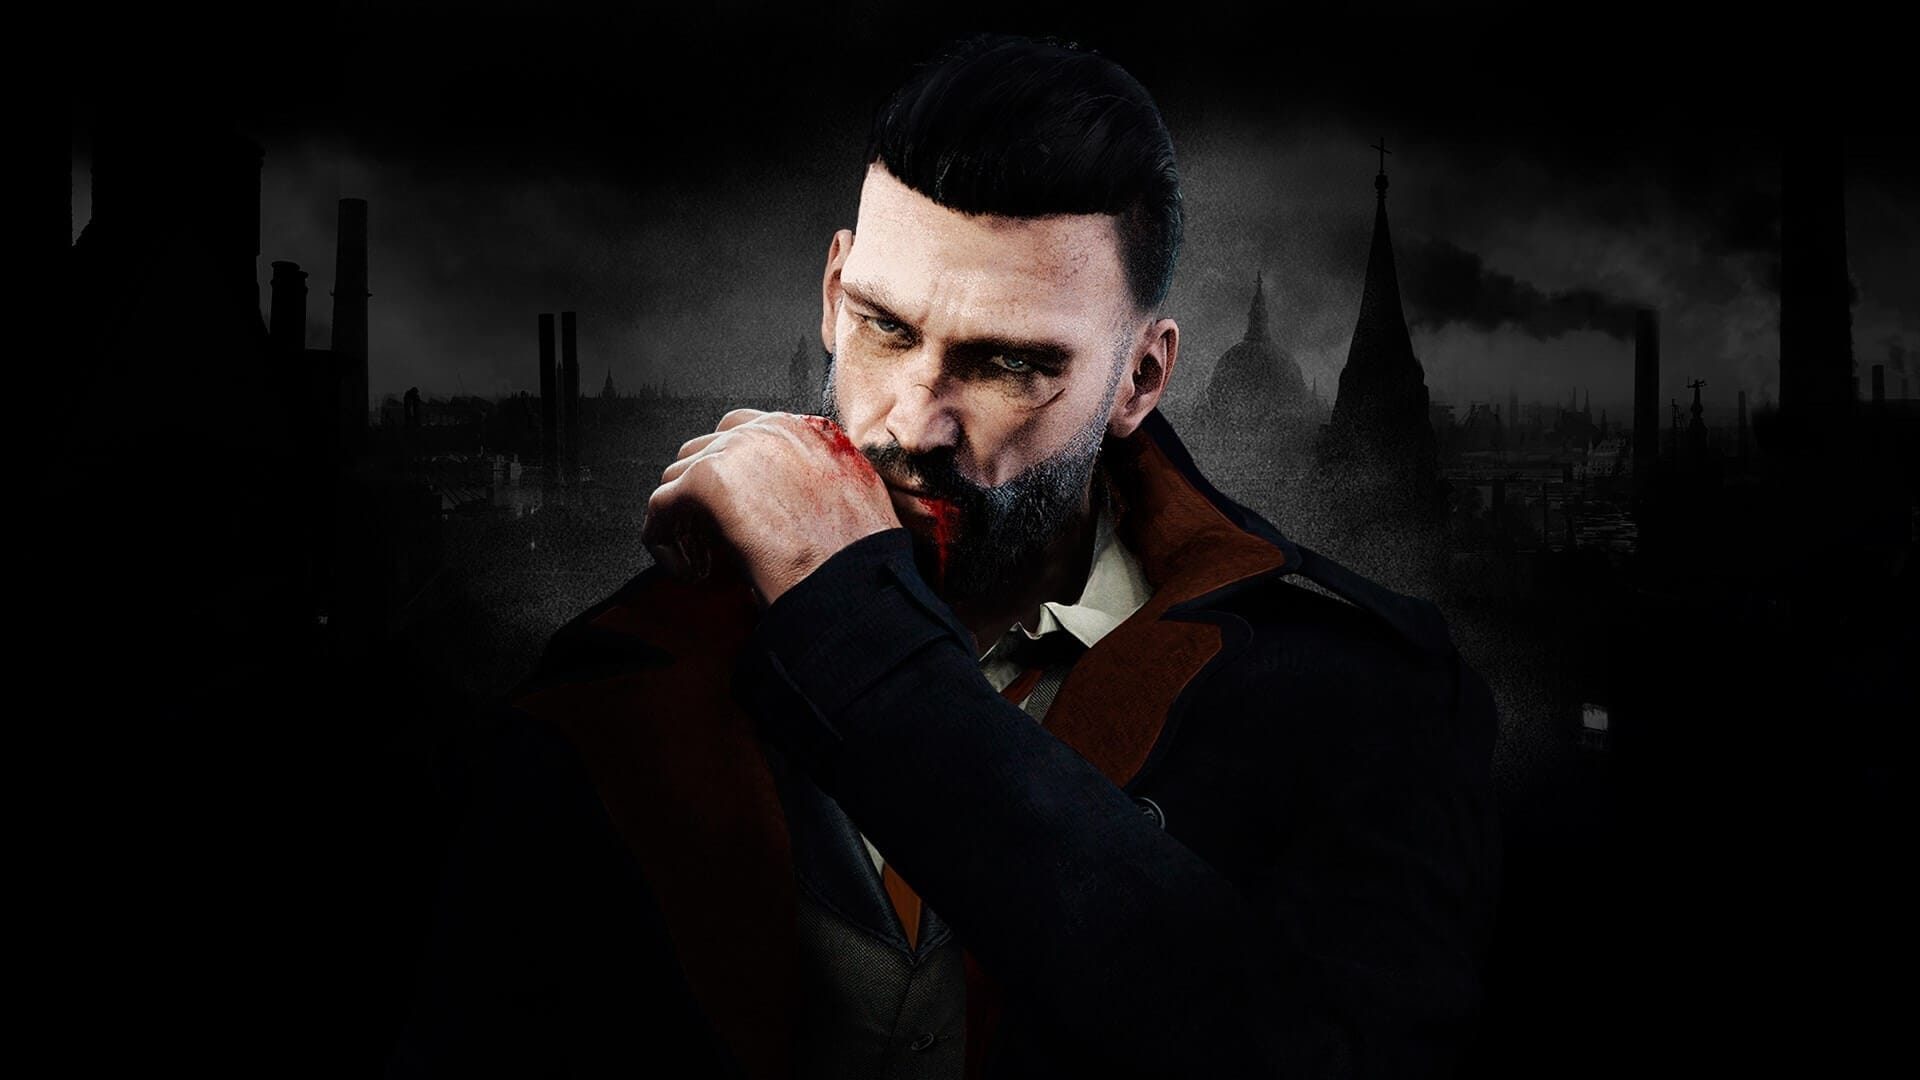 humble20choice20overview20august20202020vampyr20header-3022331